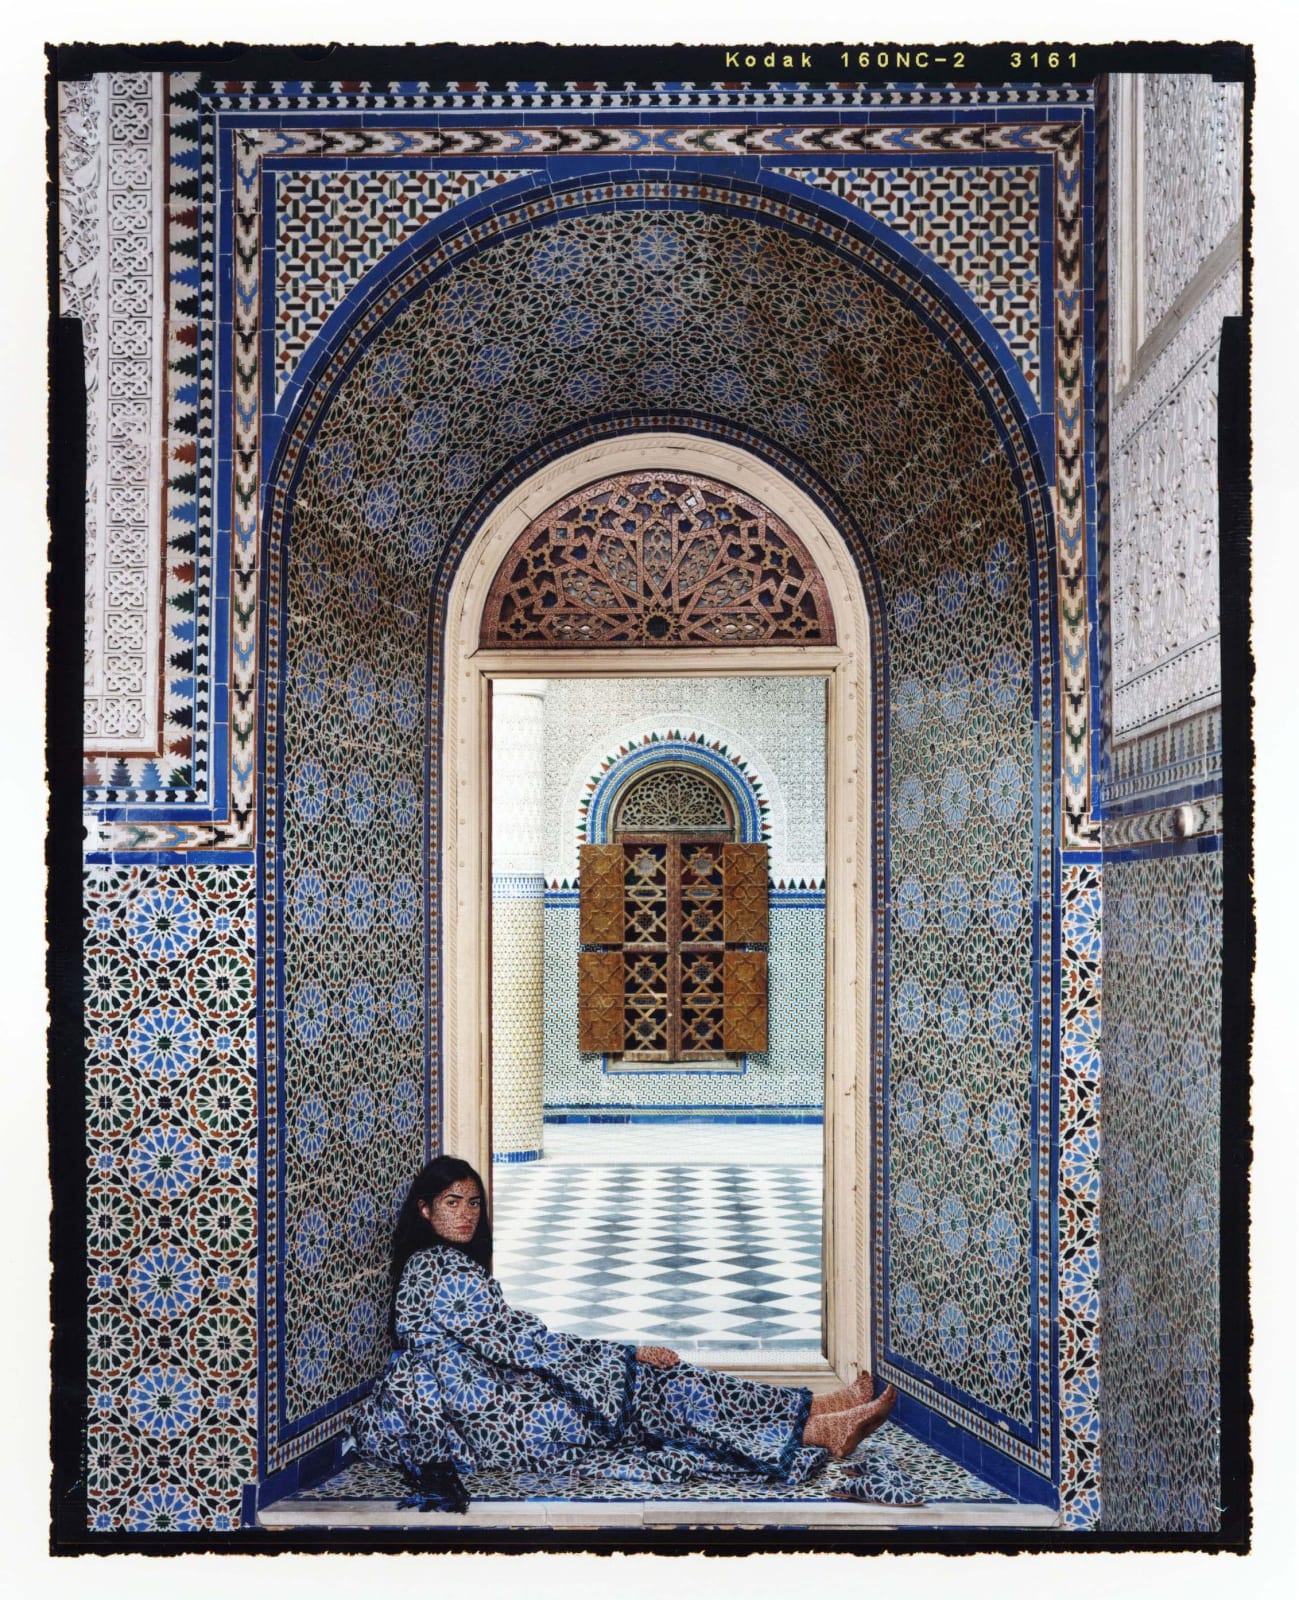 Woman sitting in doorway of Moroccan palace with blue tiles, by Lalla Essaydi